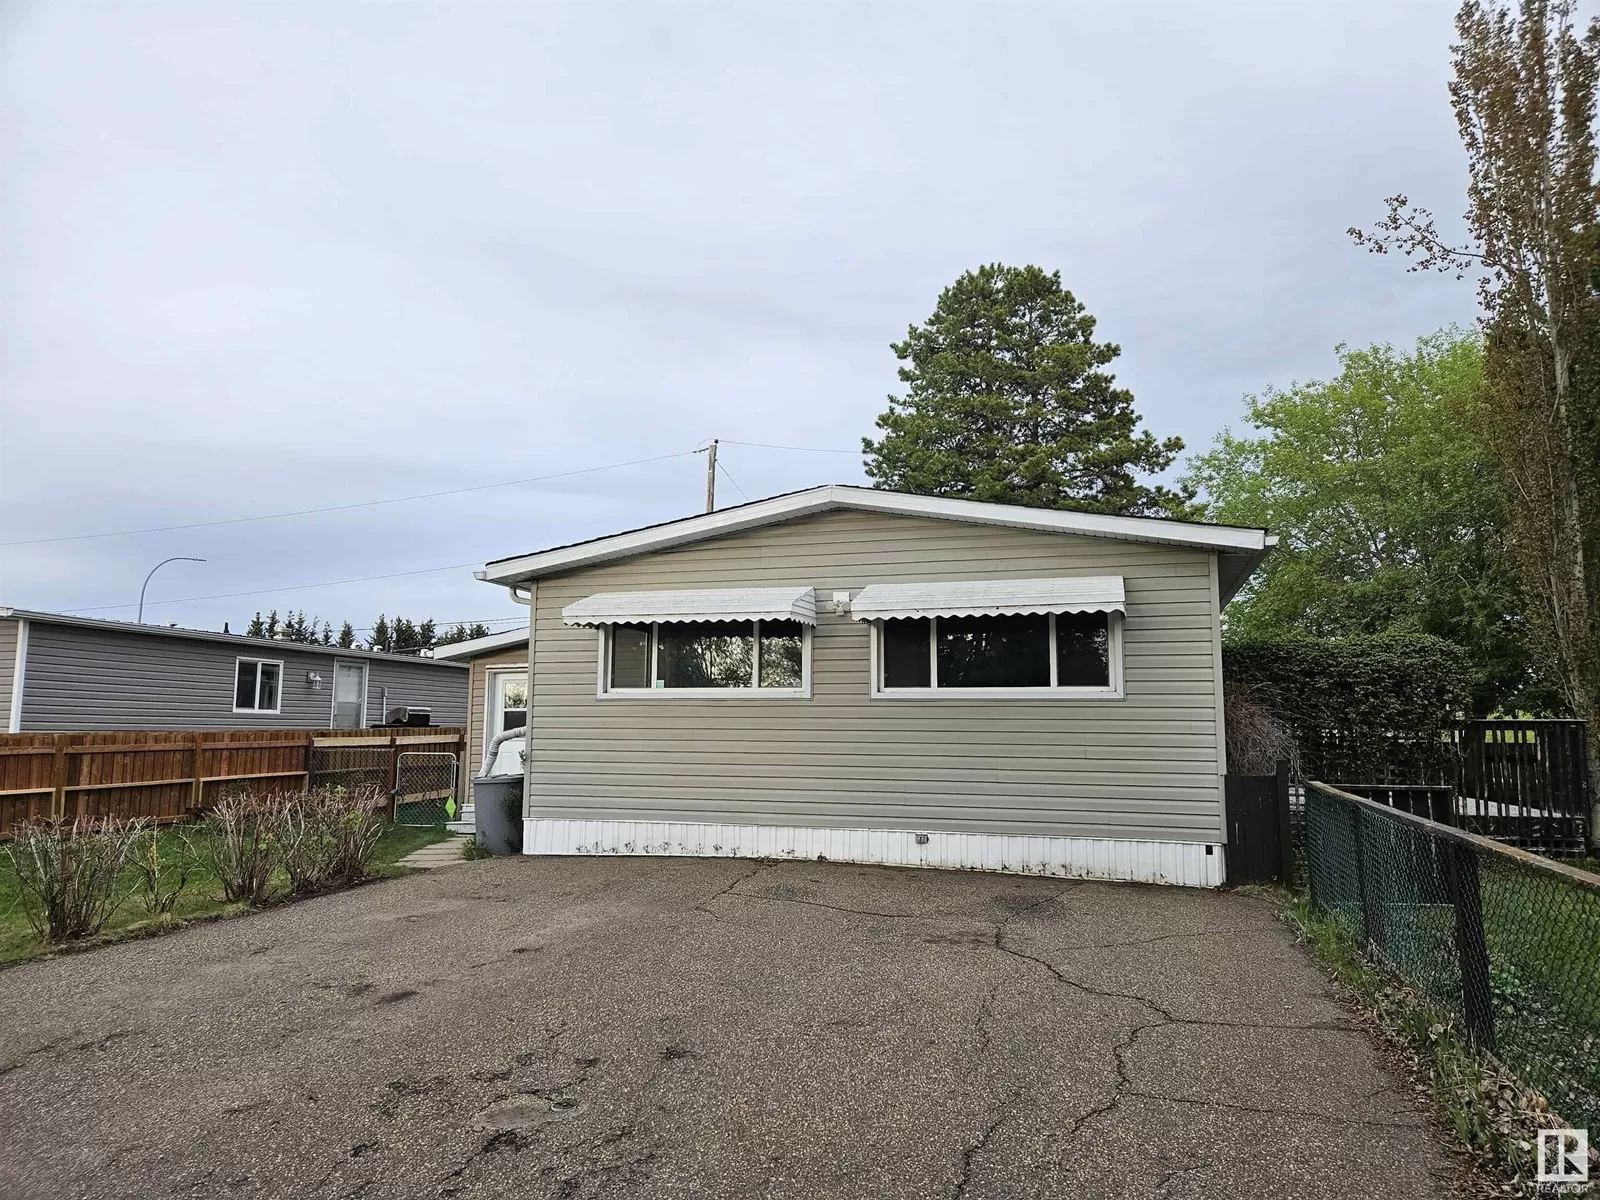 Mobile Home for rent: 1 305 Calahoo Rd, Spruce Grove, Alberta T7X 3K6